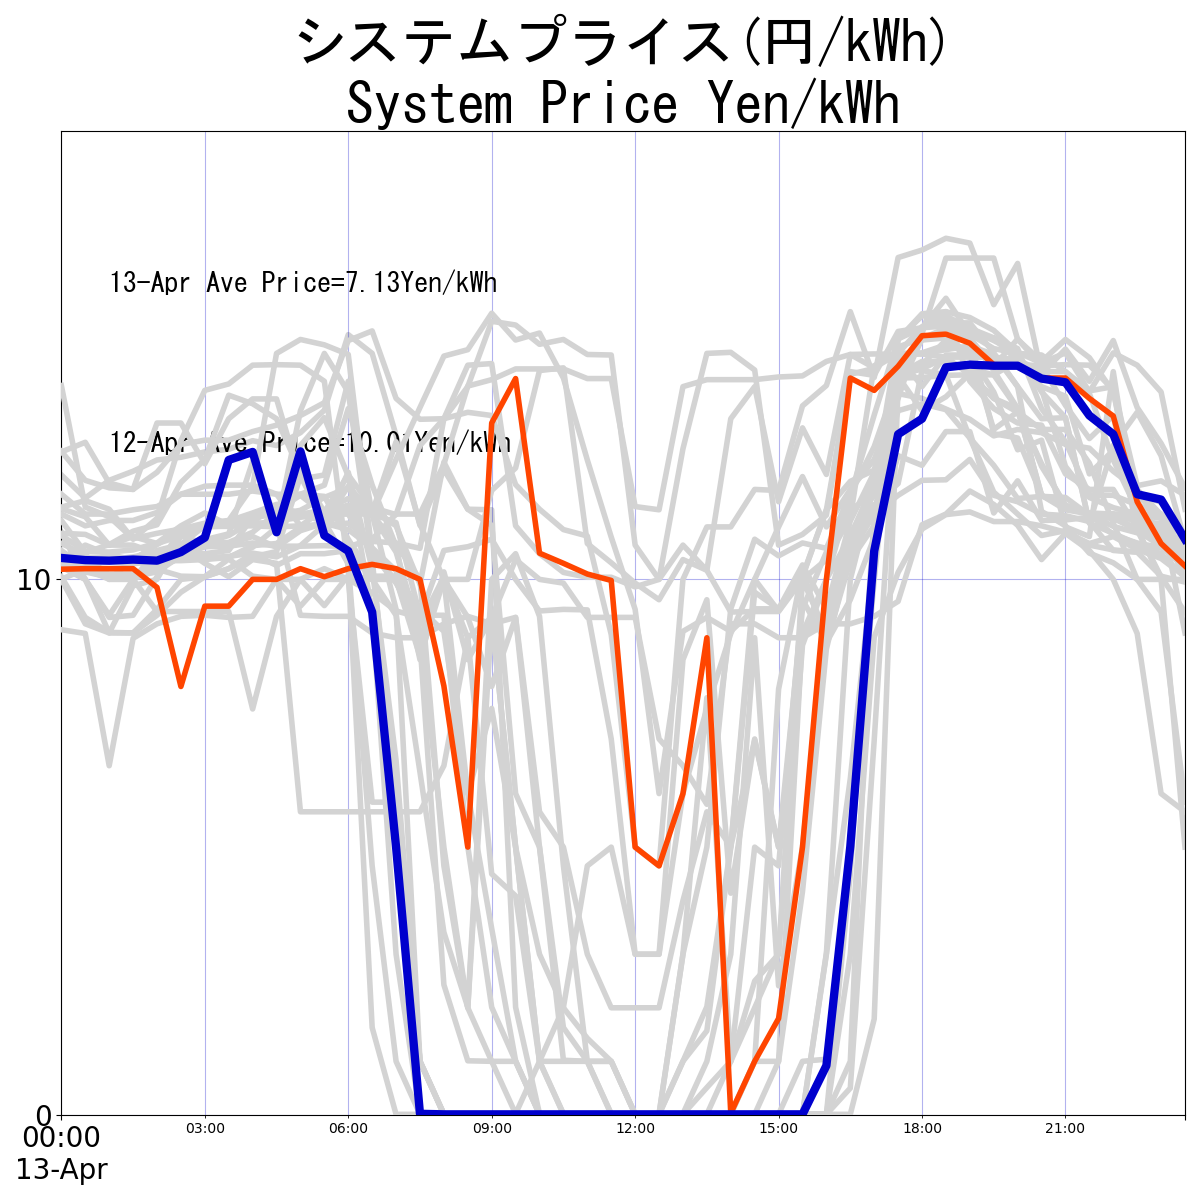 Japanese Electricity JEPX System Price plotted by time period over the last 30 days.